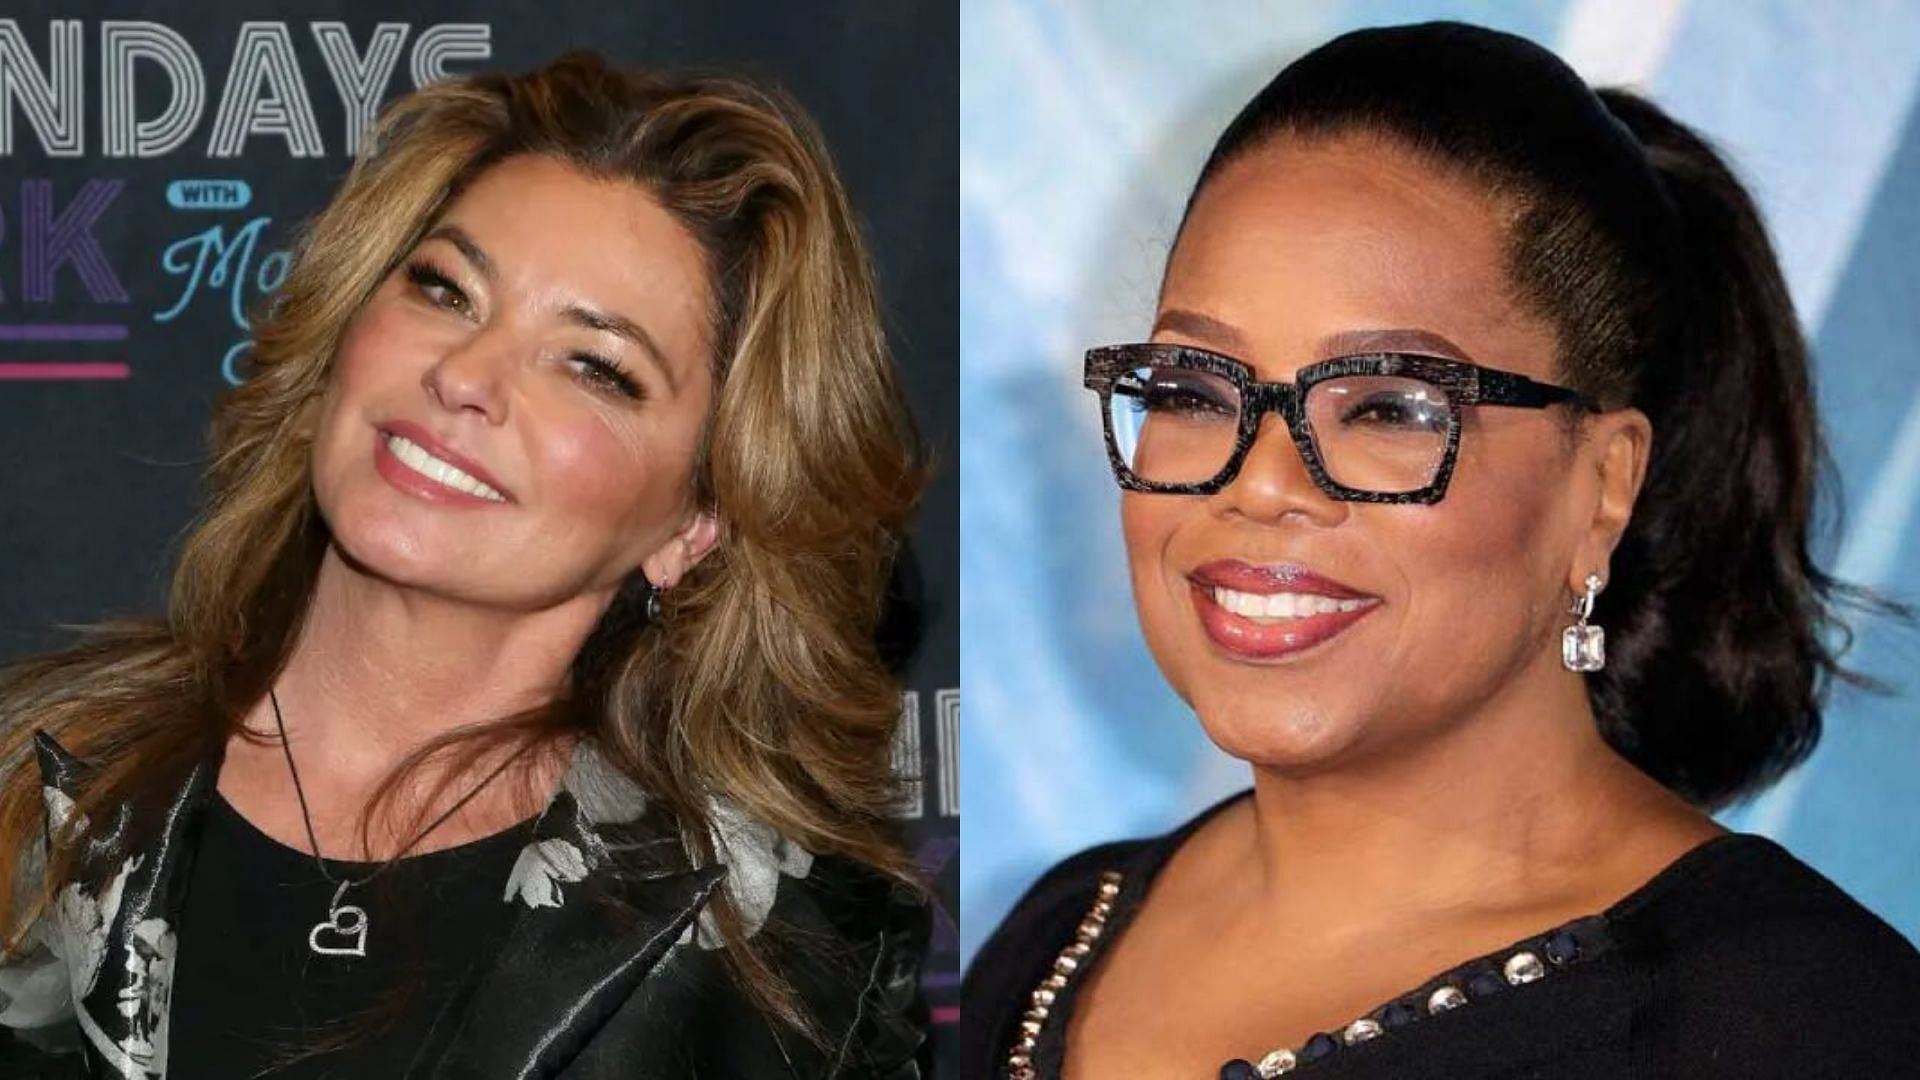 (left) Shania Twain remembers an awkward dinner with (right) Oprah Winfrey. (Images via Gabe Ginsberg/Getty Images and John Phillips/Getty Images)